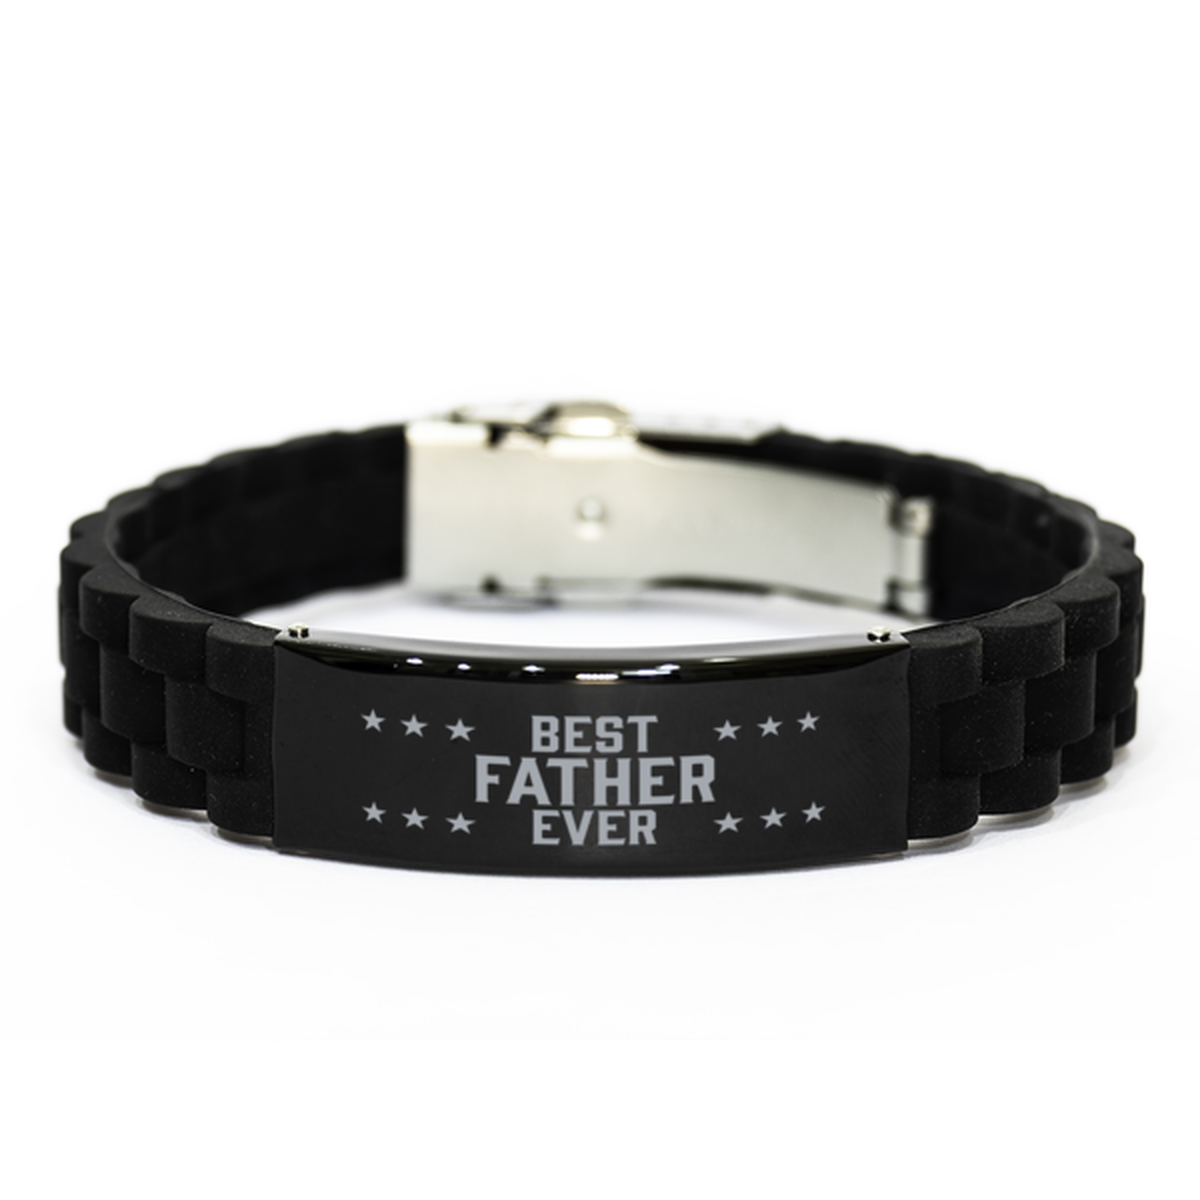 Best Father Ever Father Gifts, Funny Black Engraved Bracelet For Father, Family Gifts For Men